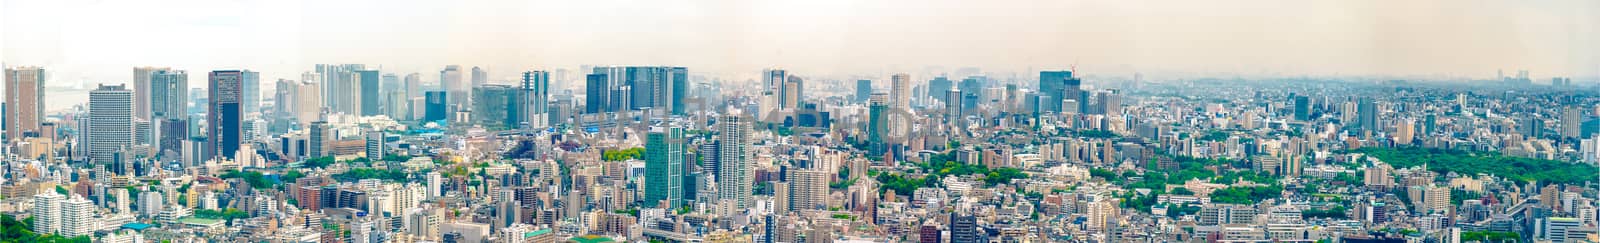 Tokyo city panorama from Mori Tower by raphtong